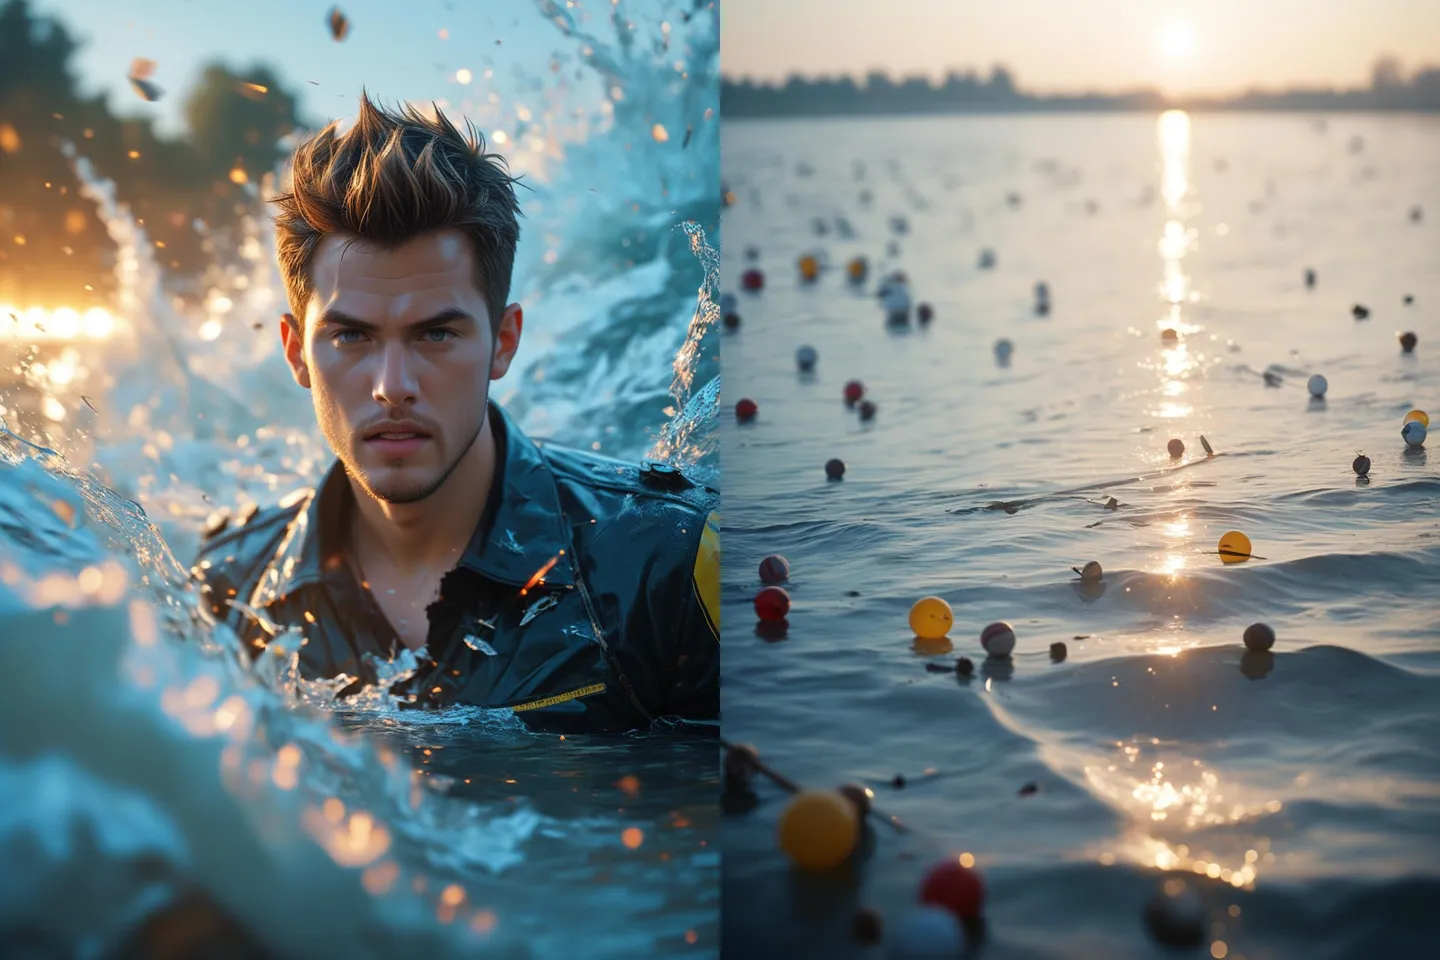 A dramatic water portrait at ocean sunset, created using Stable Diffusion AI. The left side shows a man with wet hair in splashing water, while the right side depicts a sunset over a water body with floating buoys.